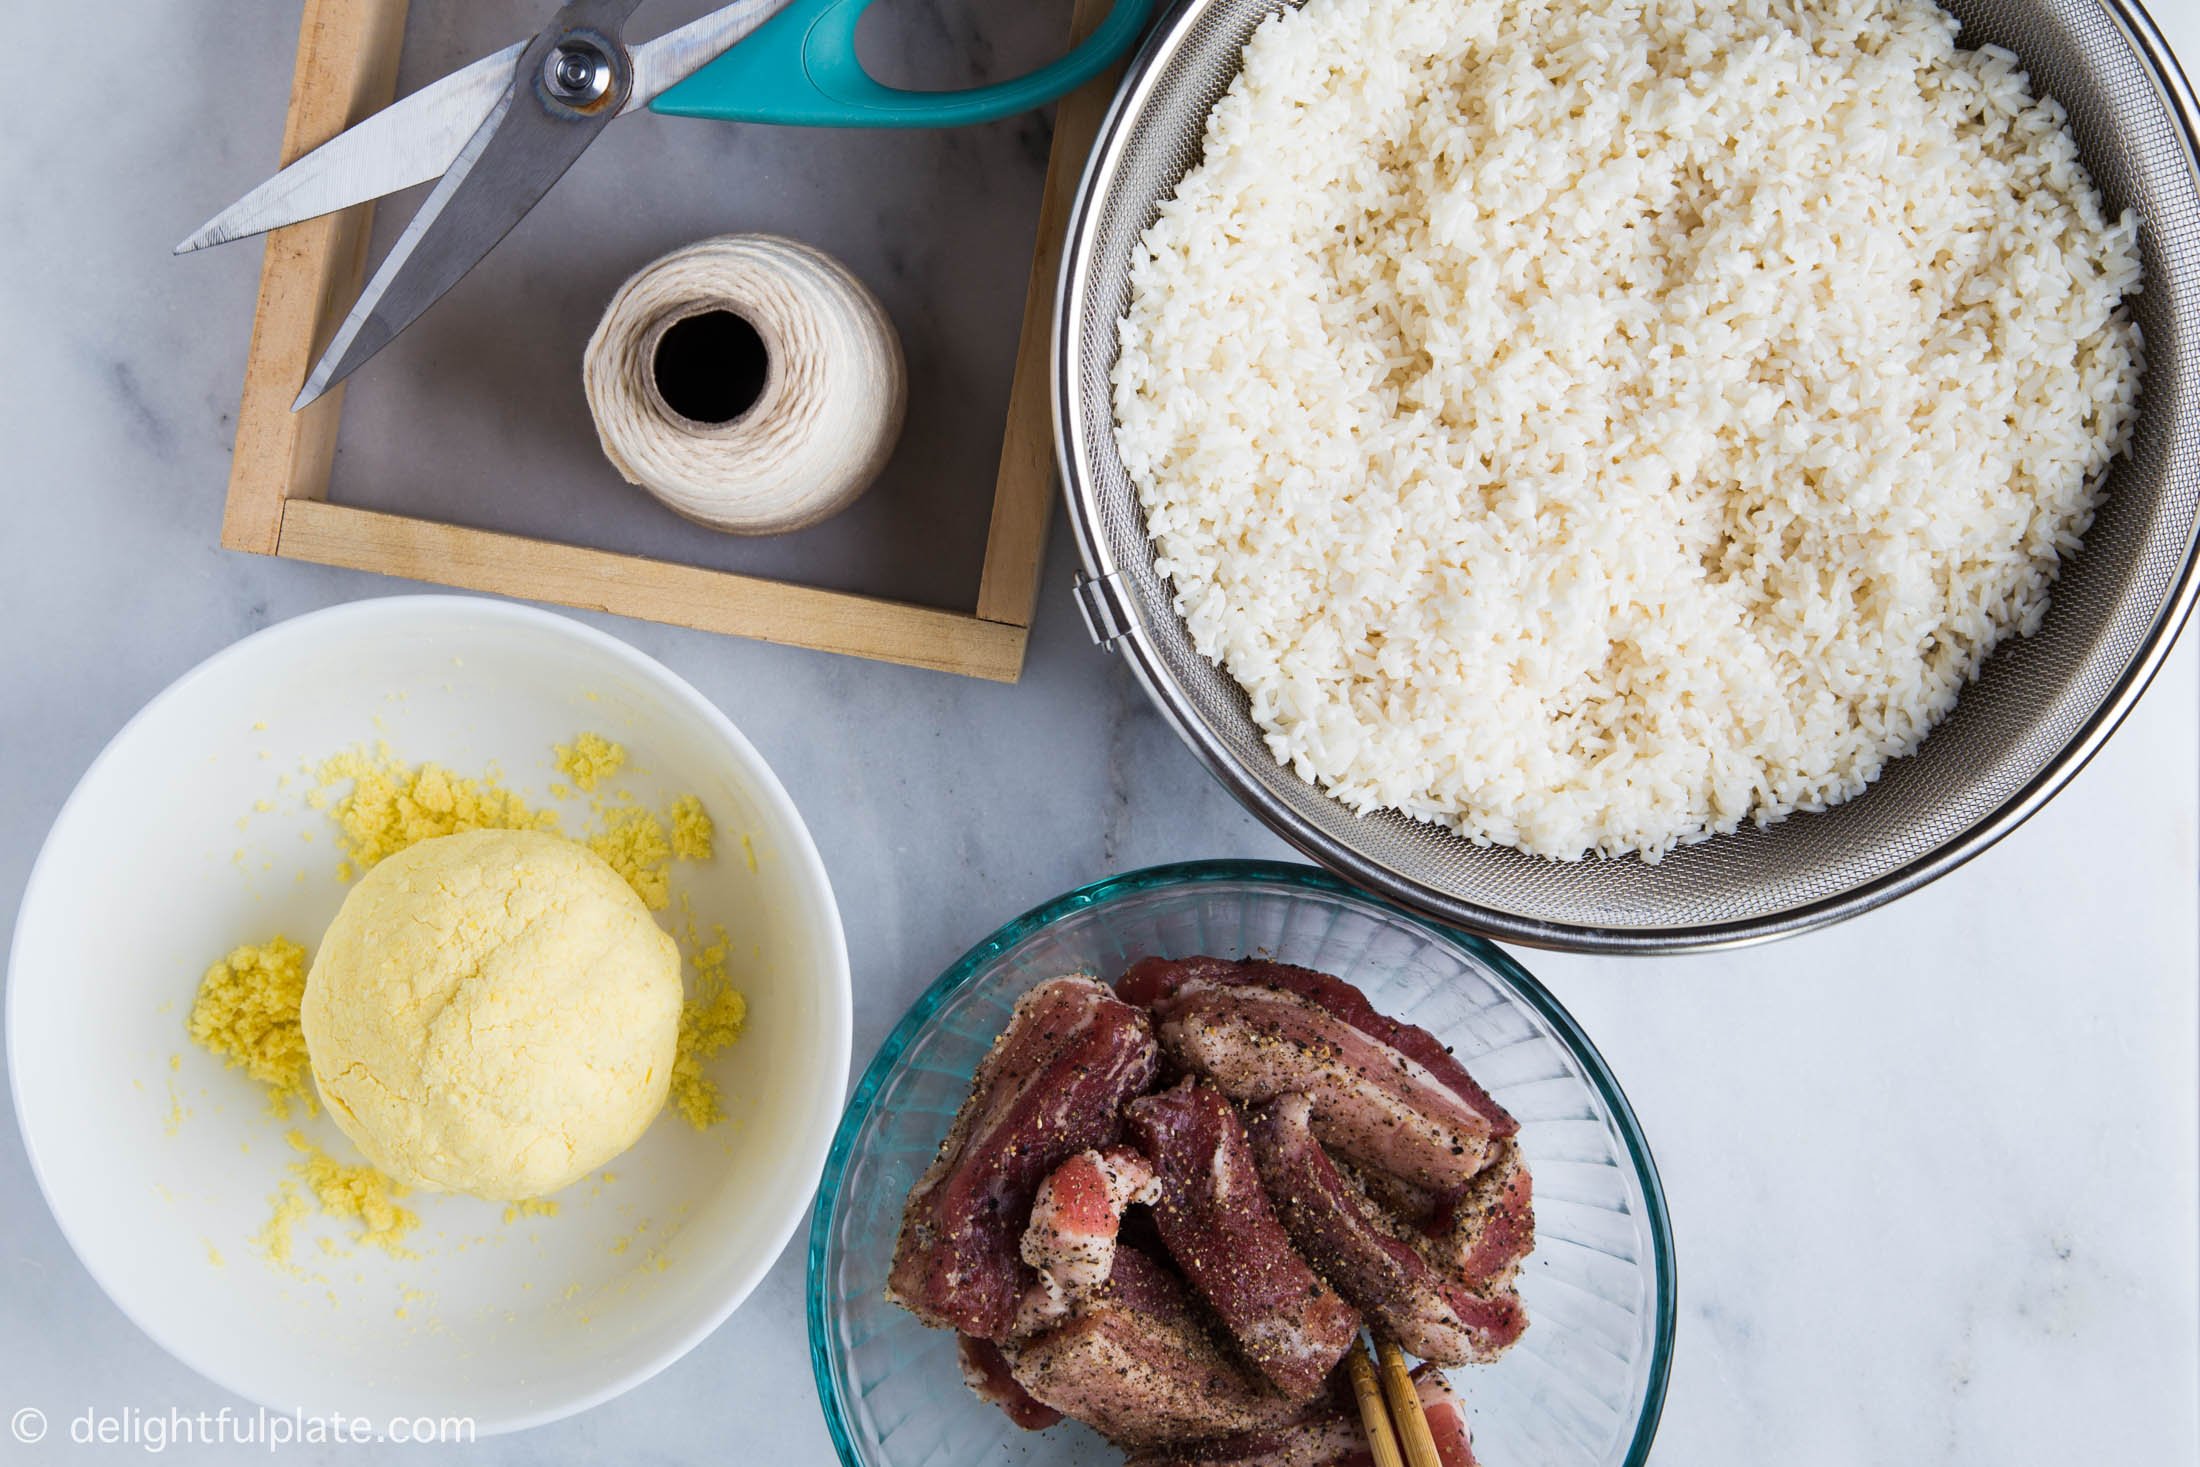 Ingredients for Banh Chung filling: long-grain sticky rice, mung bean and pork belly